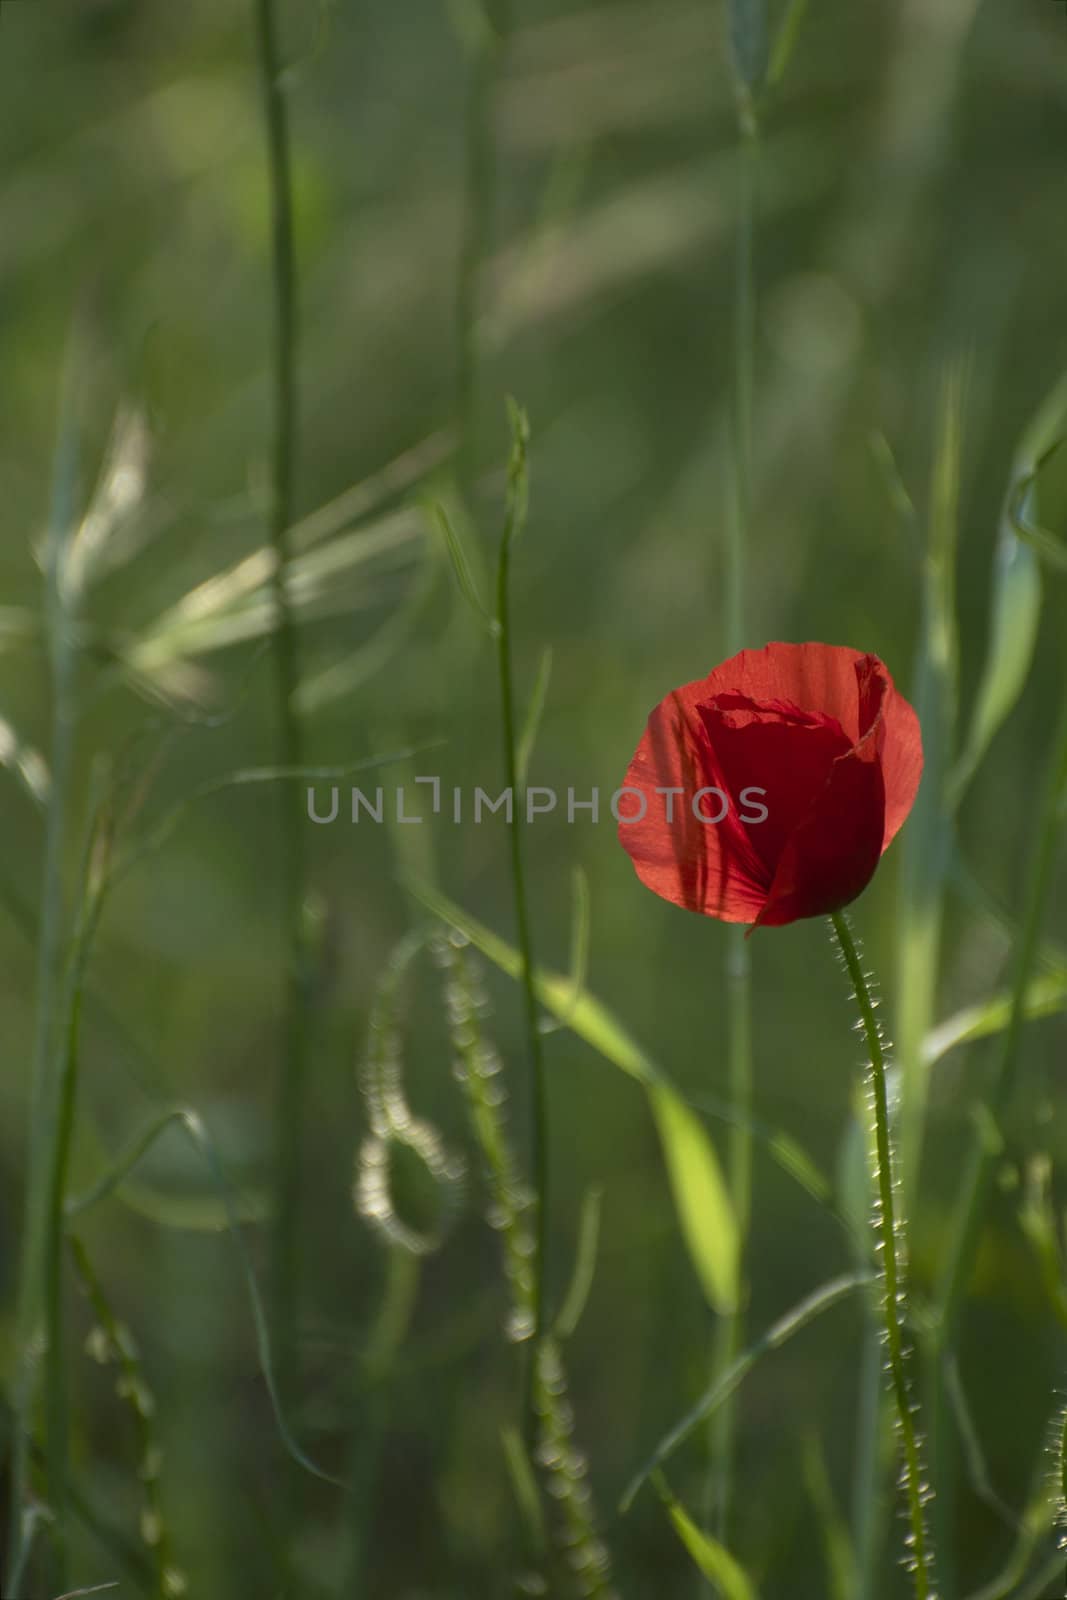  Red poppies by t3mujin